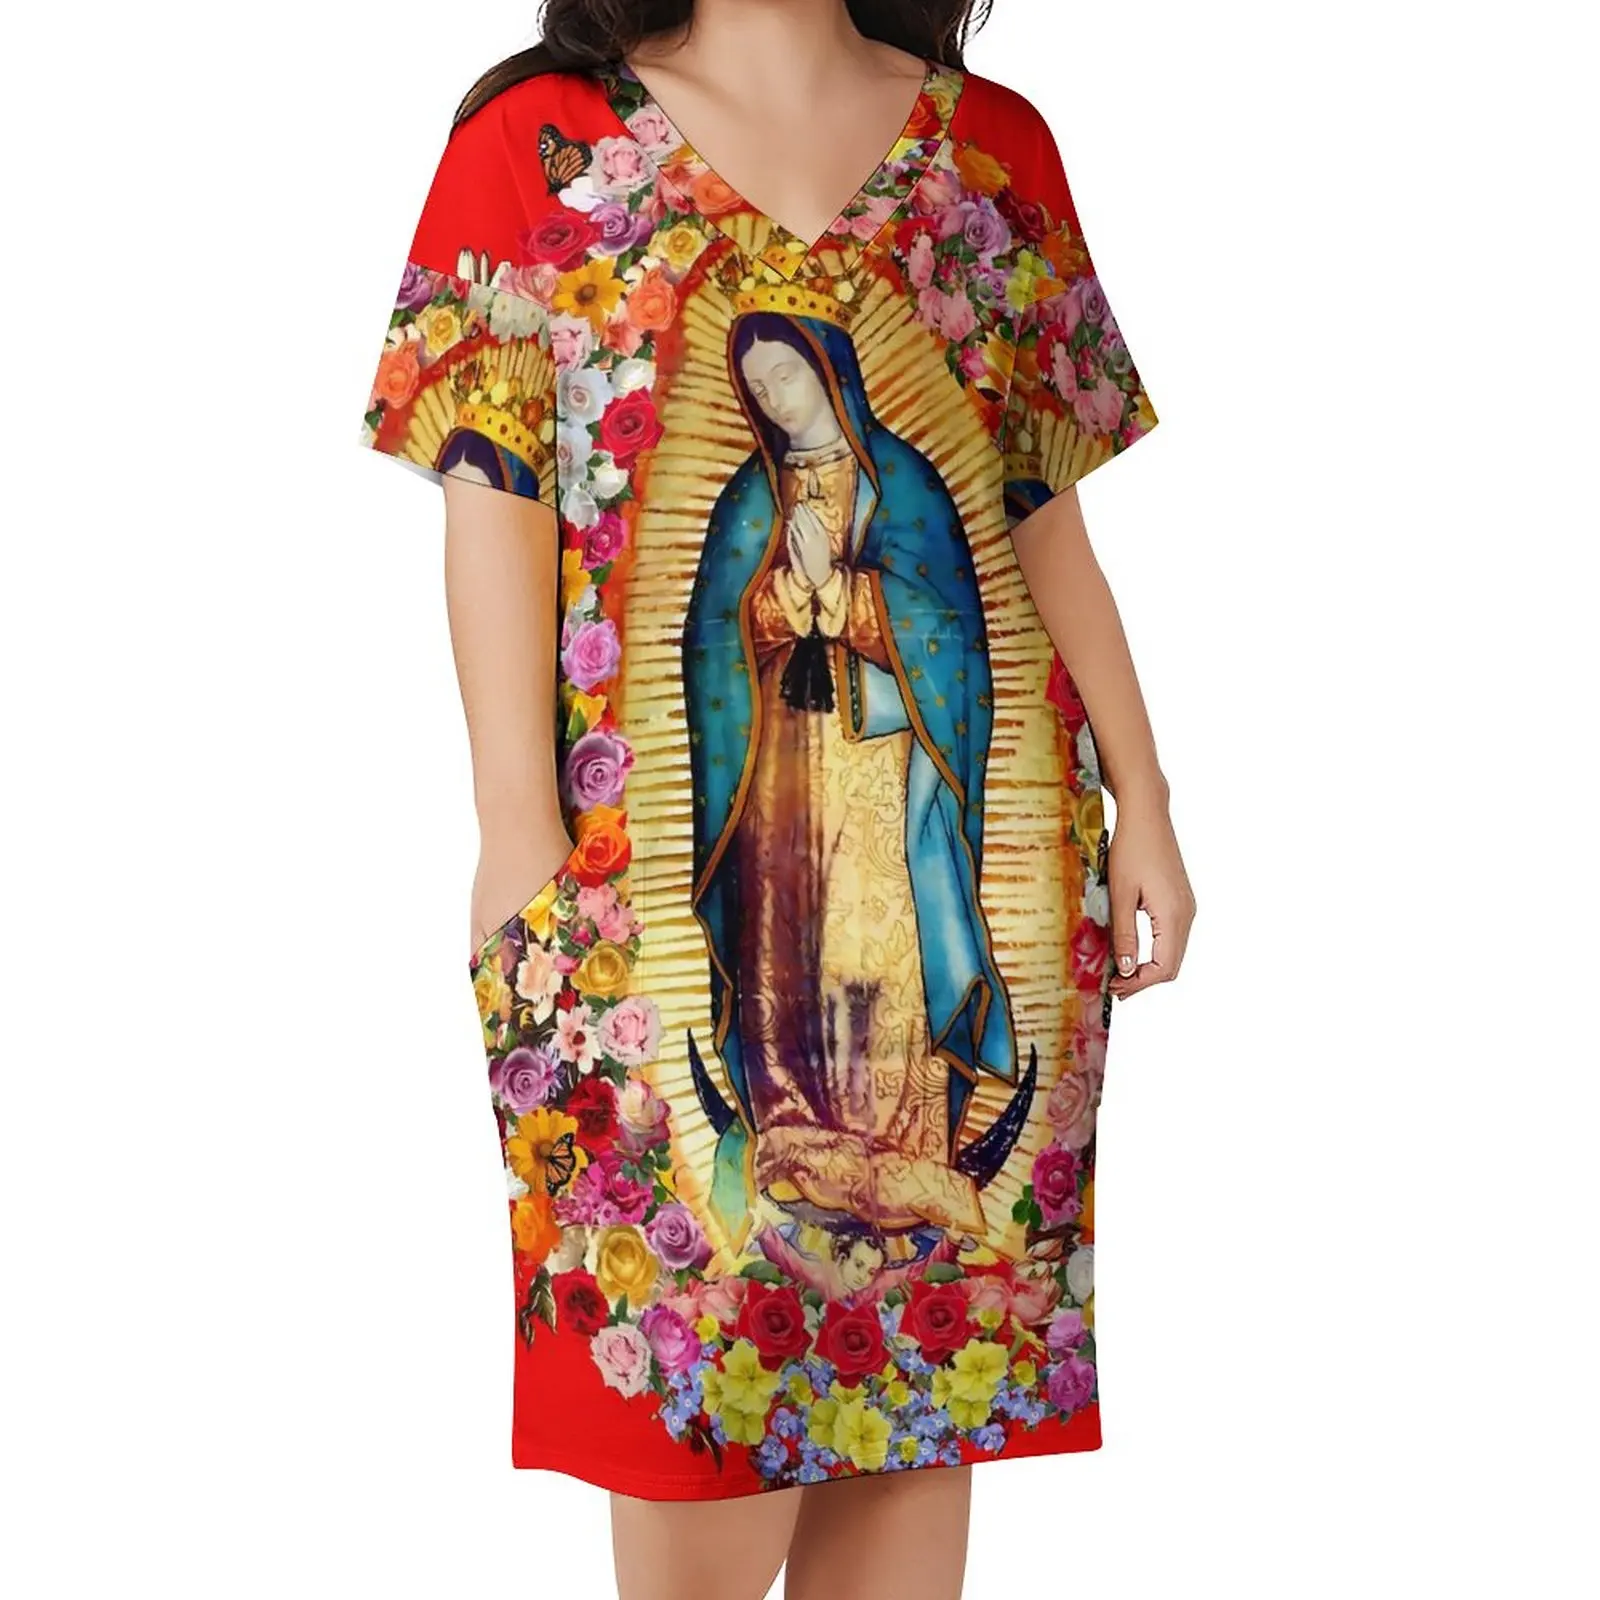 

Mexican Virgin Mary Dress Women Our Lady of Guadalupe Street Fashion Casual Dress Summer Short Sleeve Stylish Oversized Dresses